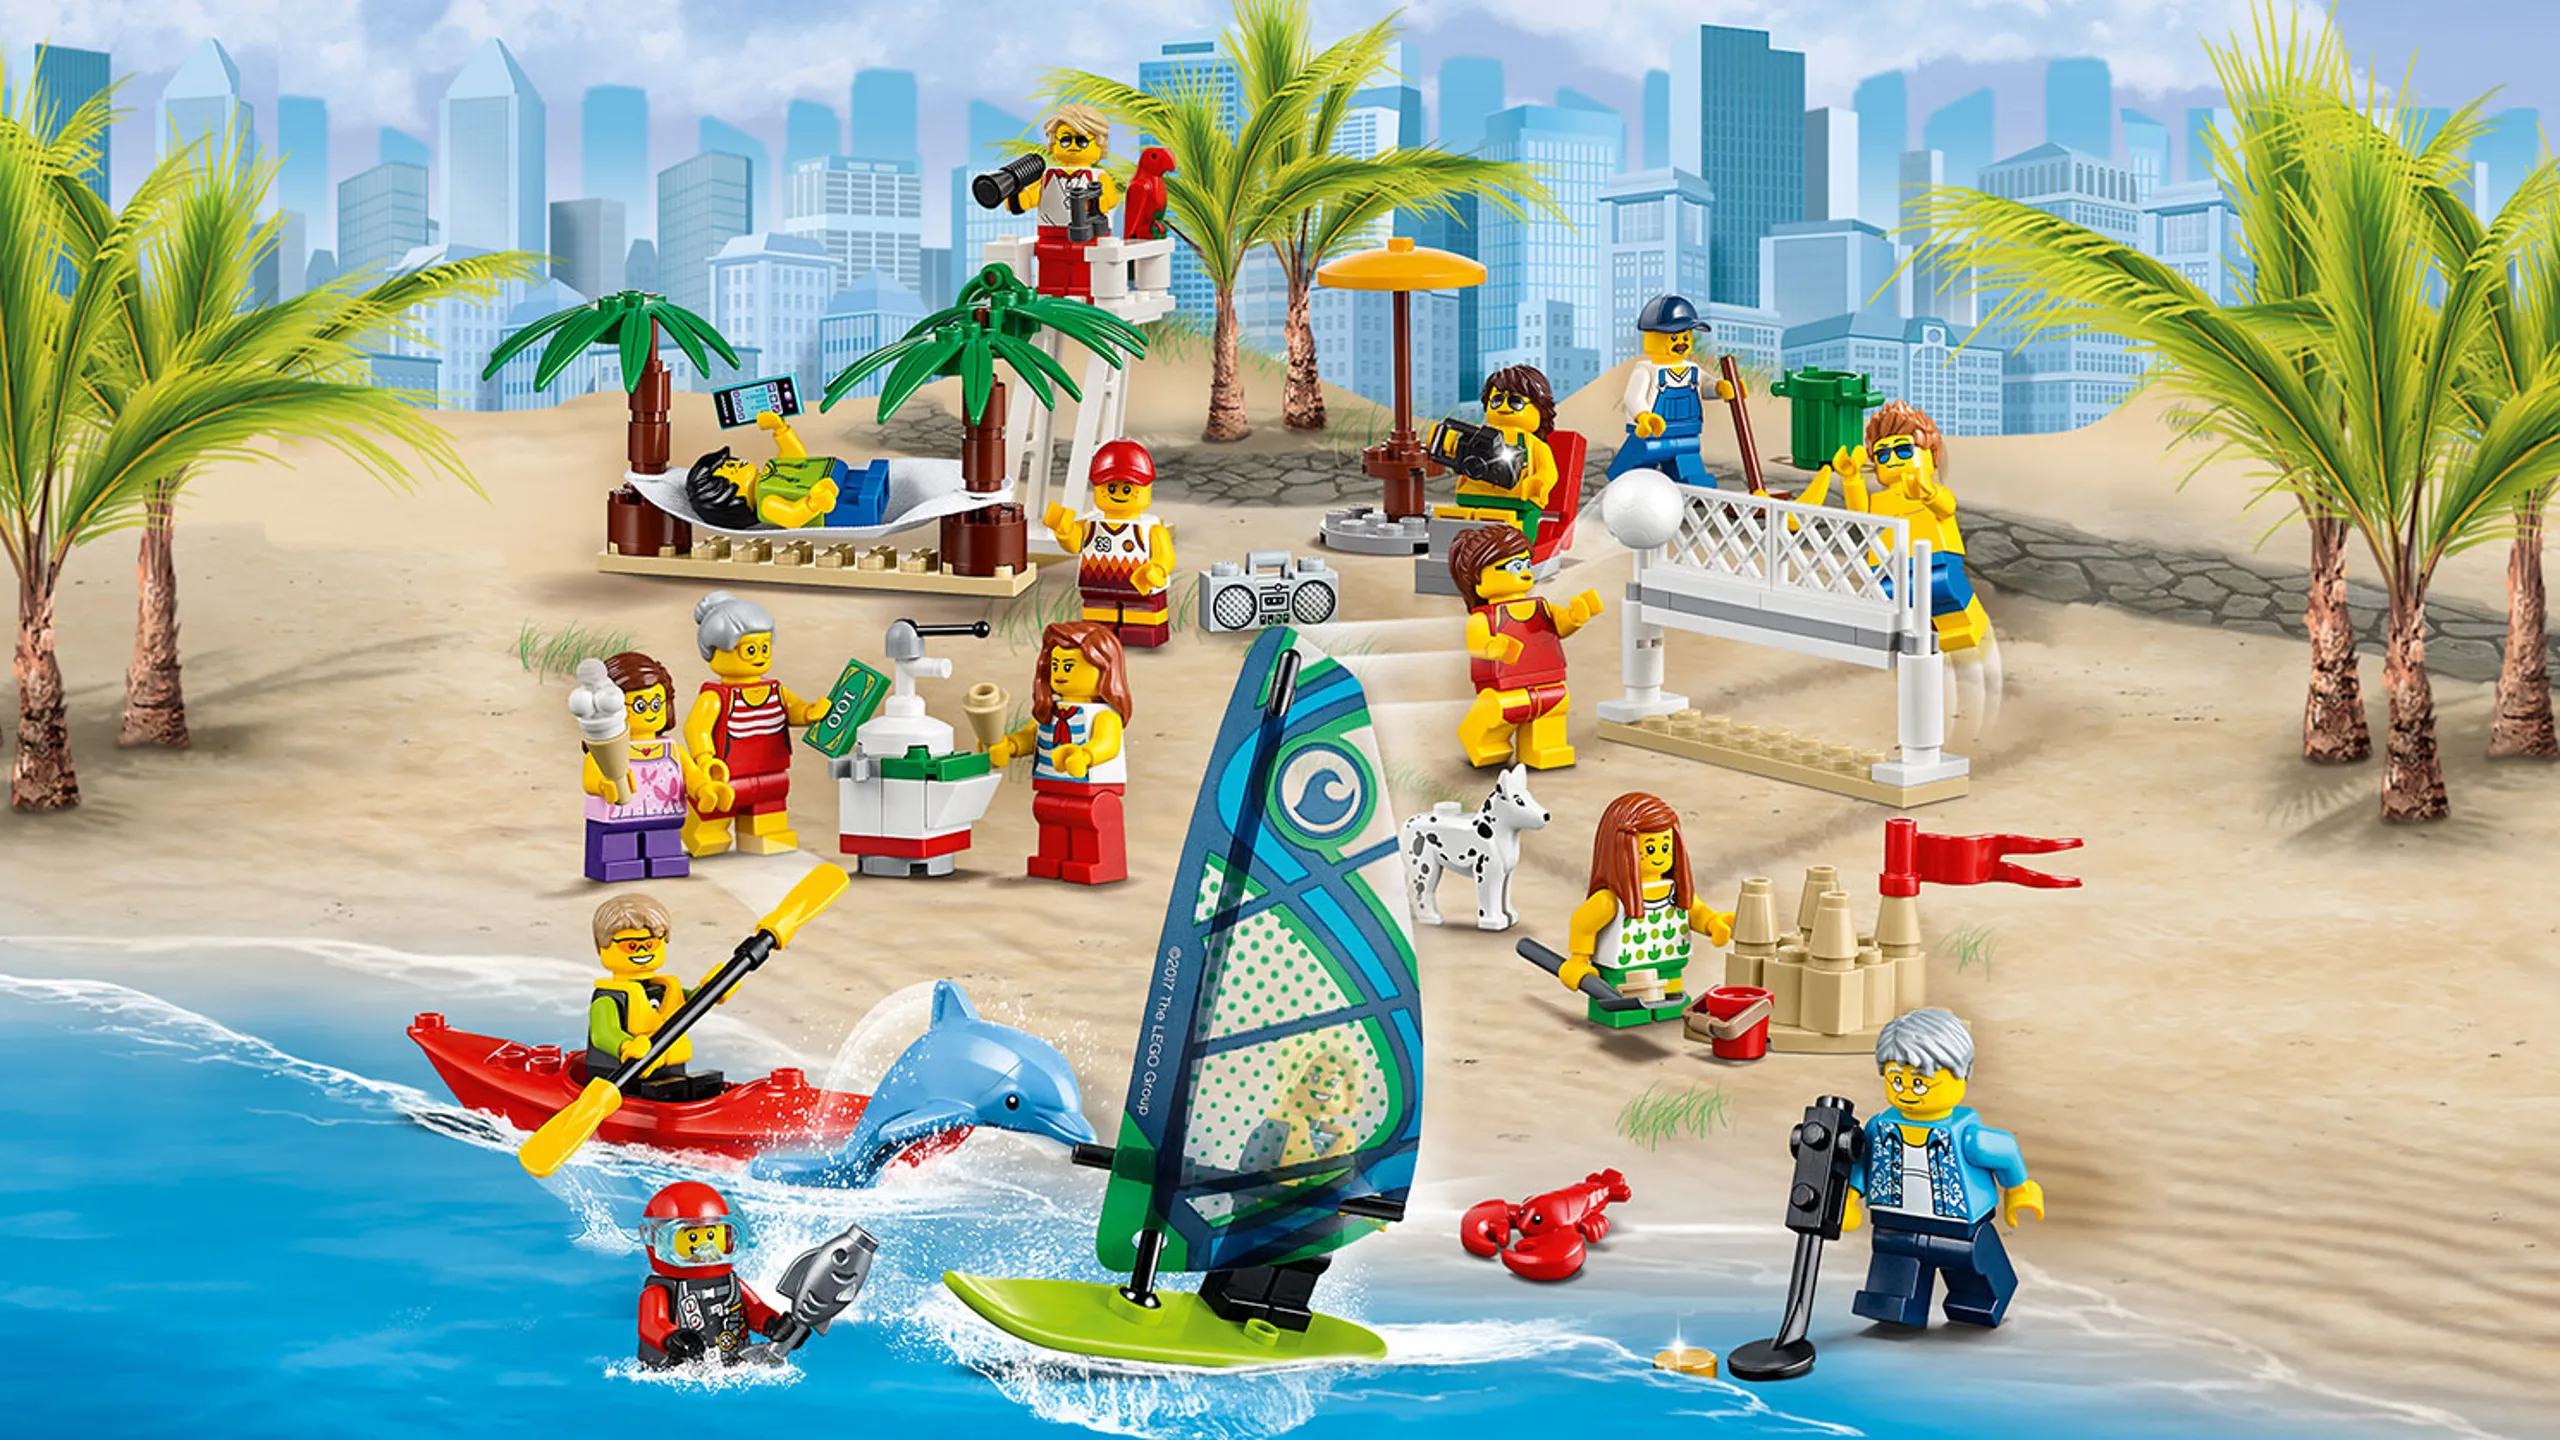 LEGO City Town - 60153 People Pack: Fun at the Beach - Warm summer day at the beach is perfect for kayaks, beach volley, ice cream and sand castles.